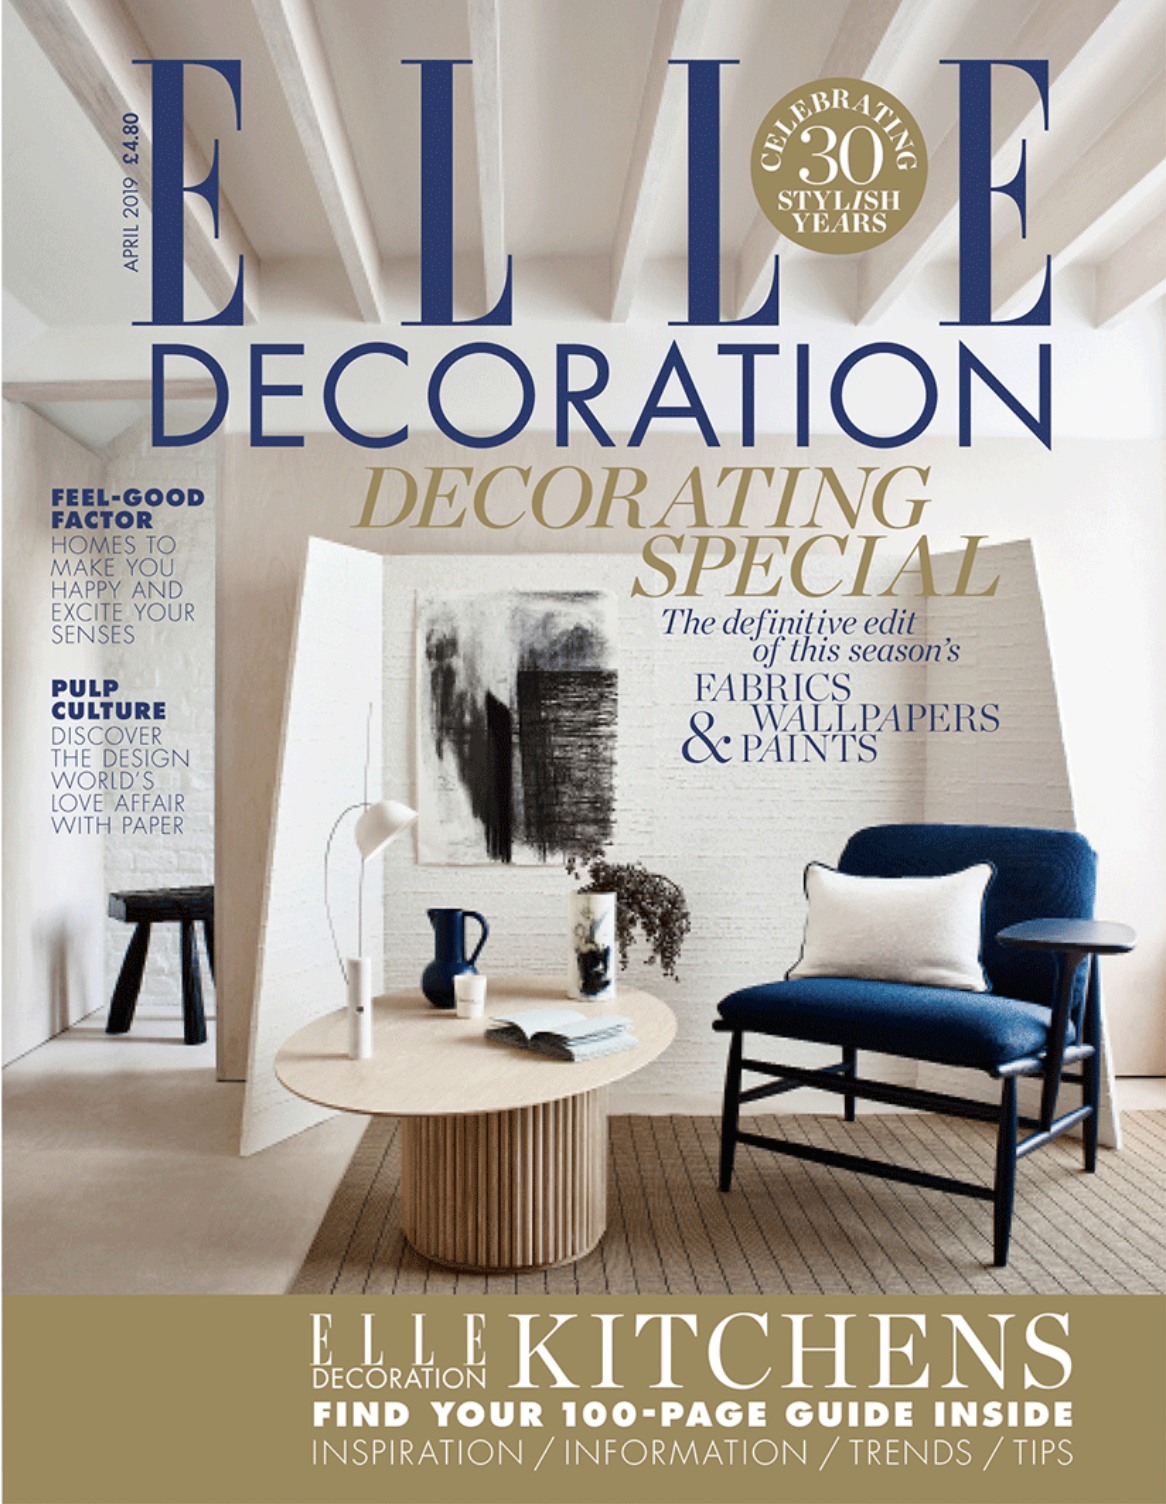 Celebrate in style with the new January issue